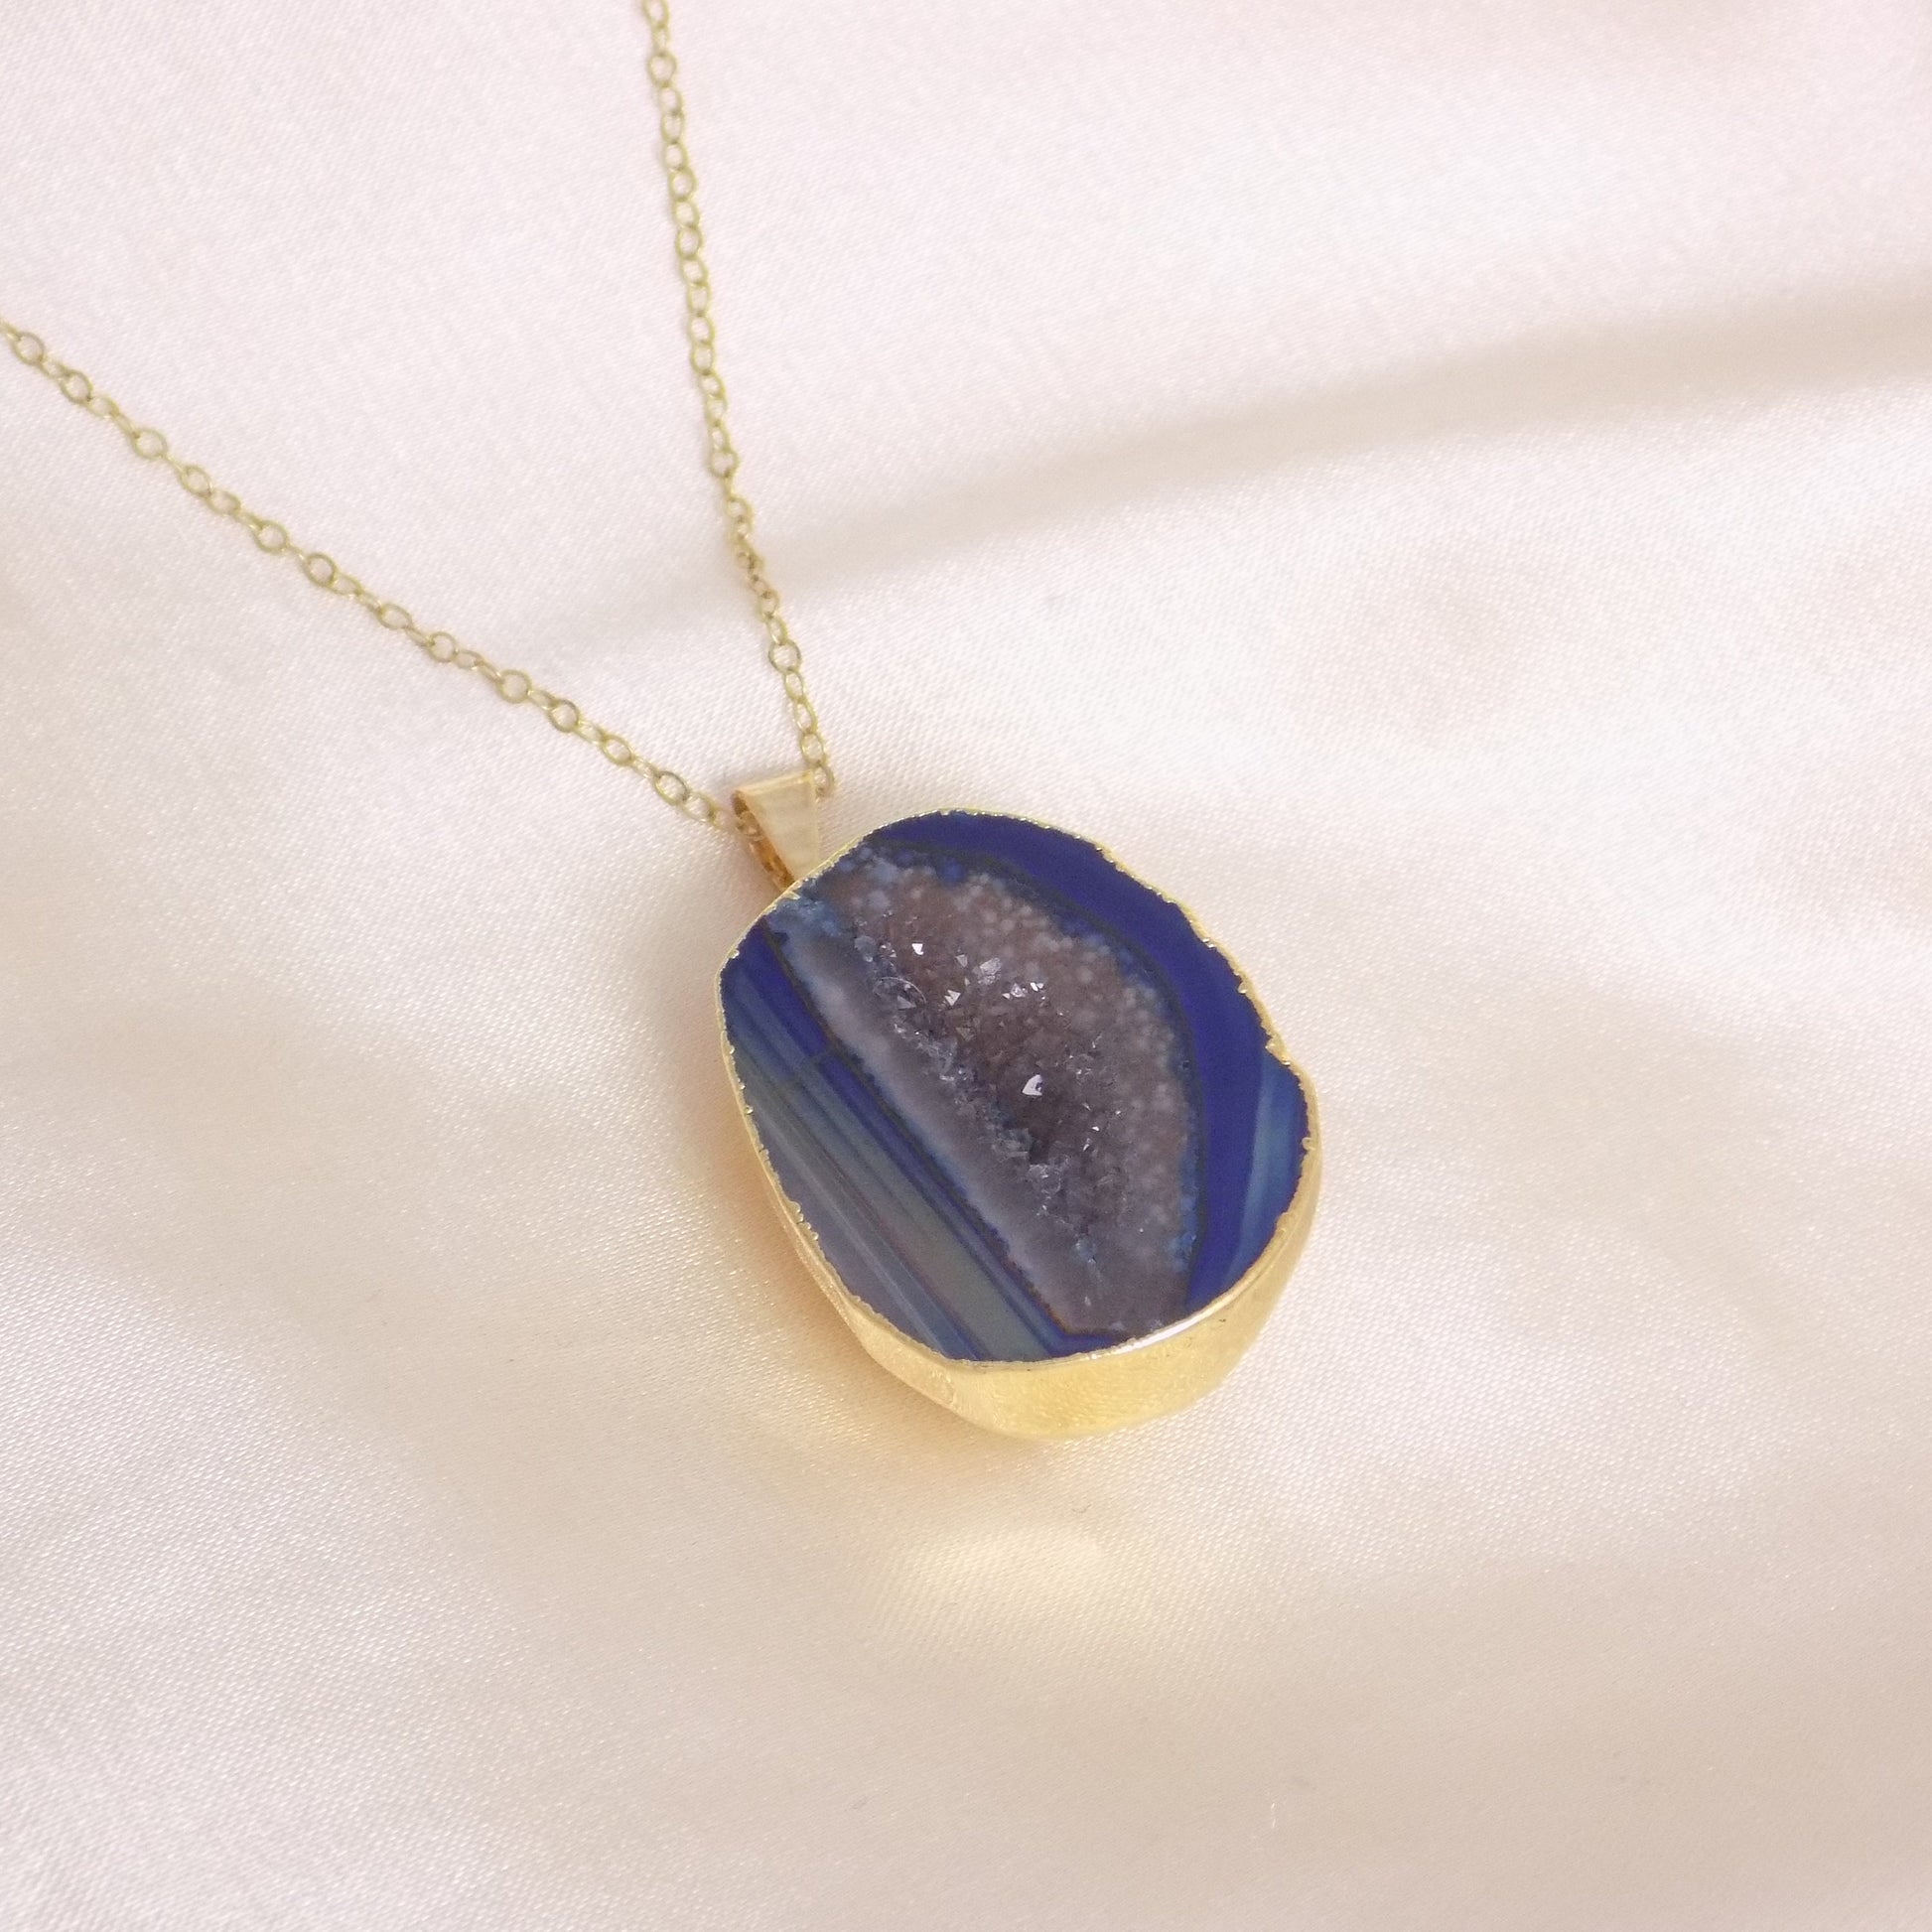 Boho Raw Crystal Natural Geode Necklace For Women, Blue Druzy Pendant, G14-817